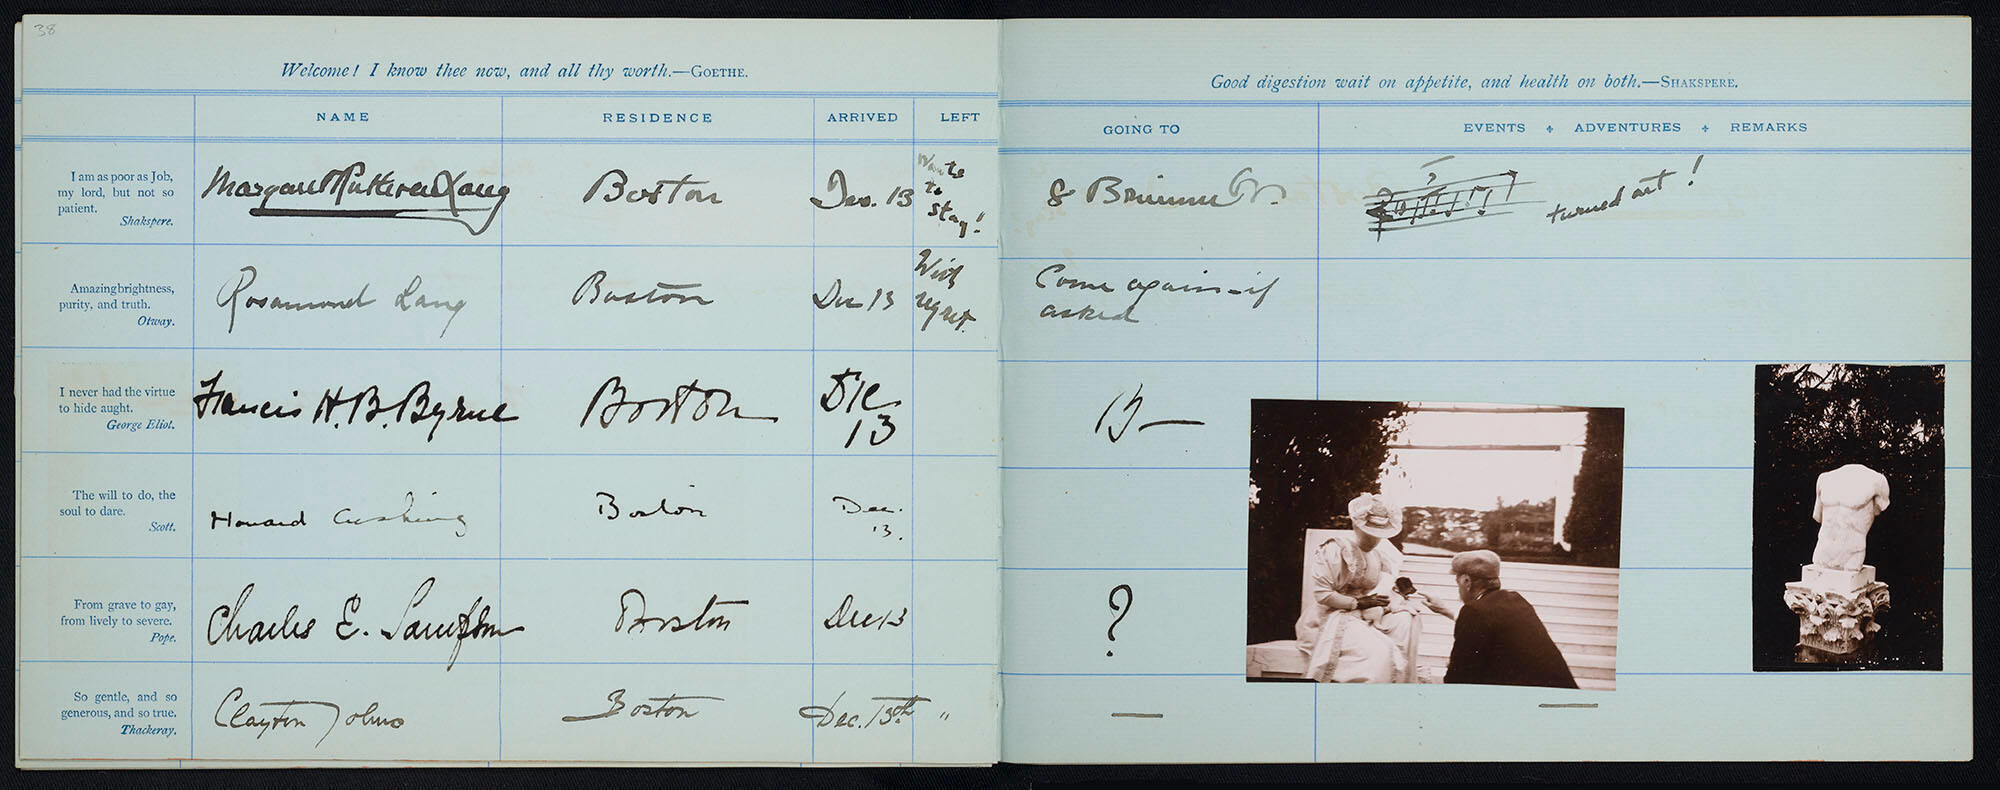 Pages of handwritten entries from Isabella’s guest book, including individuals’ names, residences, dates of the visit, next destination, and remarks. The top entry is the signature of Margaret Ruthven Lang with a bar of music.